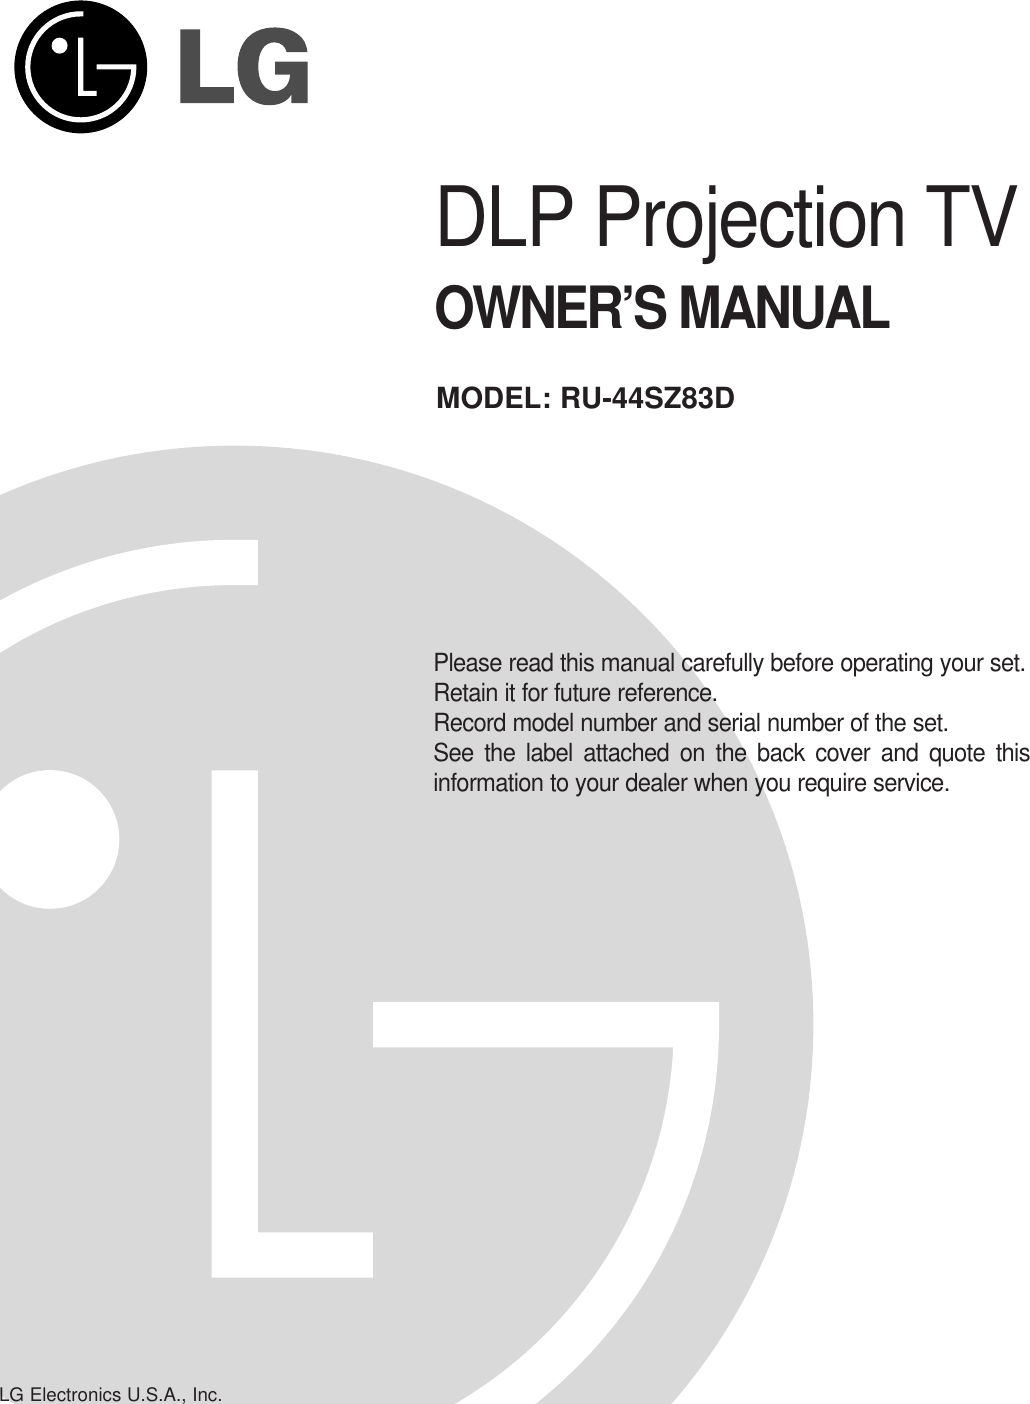 DLP Projection TVOWNER’S MANUALPlease read this manual carefully before operating your set. Retain it for future reference.Record model number and serial number of the set. See the label attached on the back cover and quote thisinformation to your dealer when you require service.MODEL: RU-44SZ83DLG Electronics U.S.A., Inc.